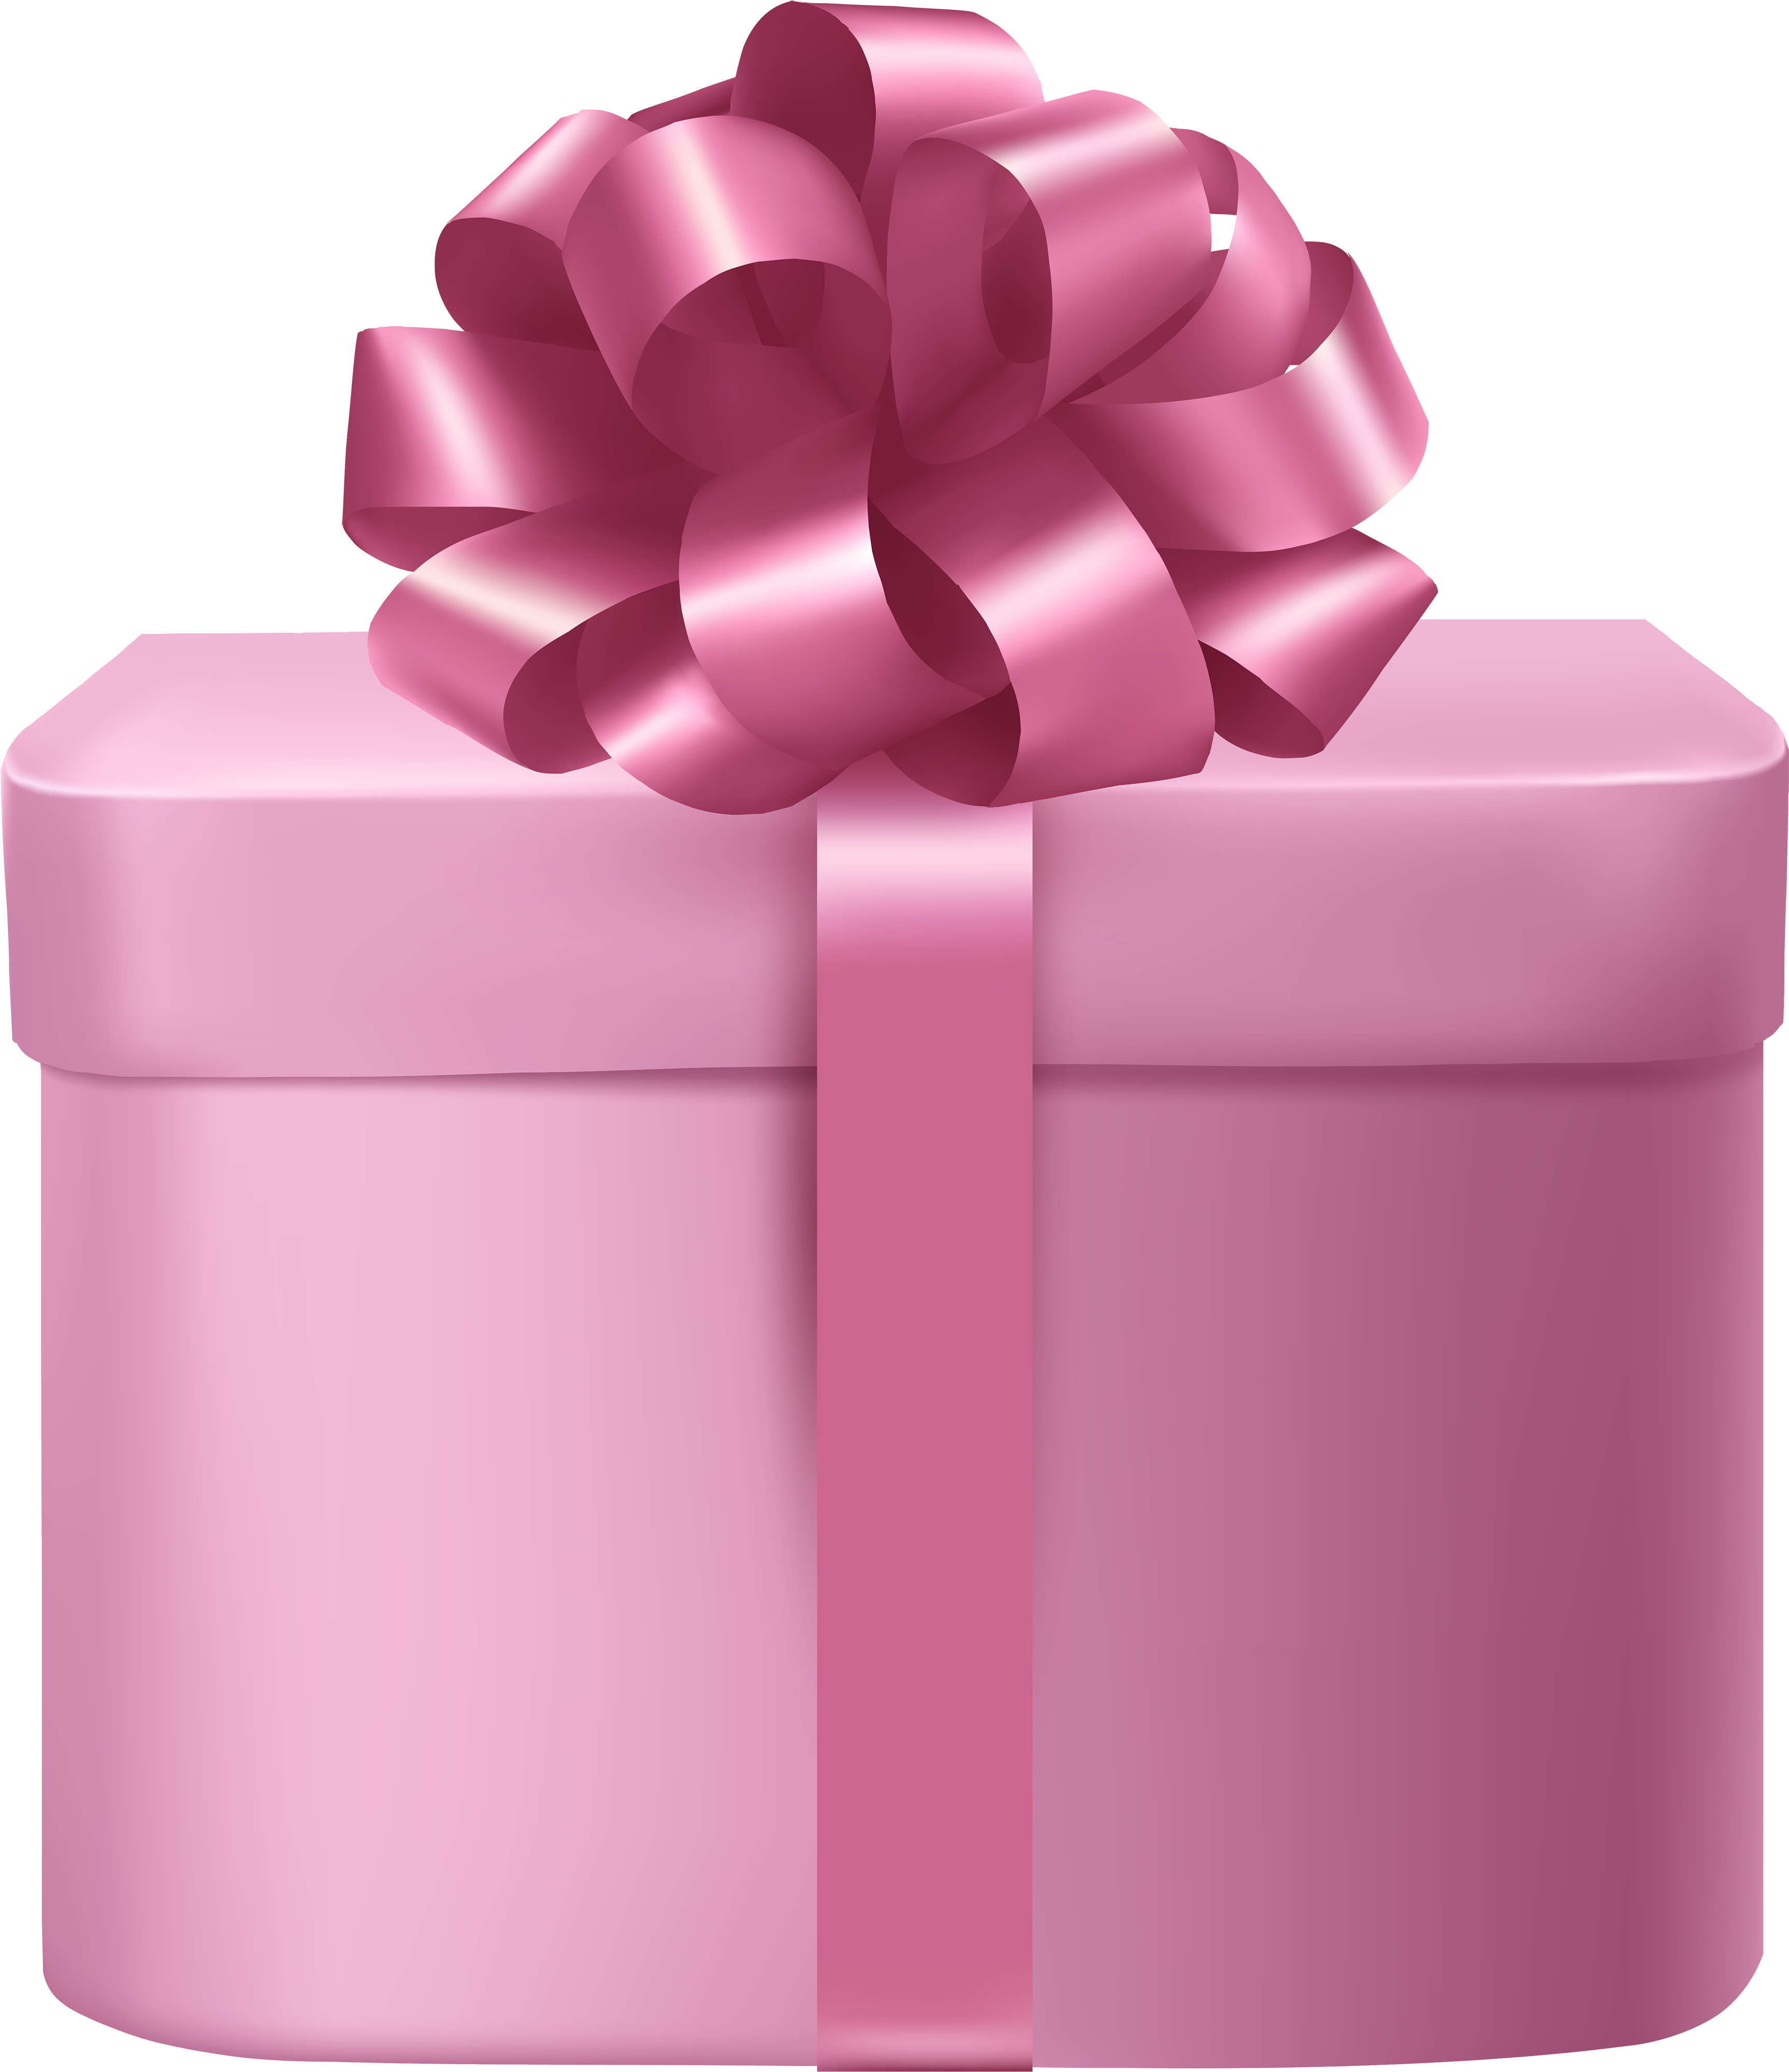 27-272158_pink-gift-png-clipart-pink-gift-clipart.png